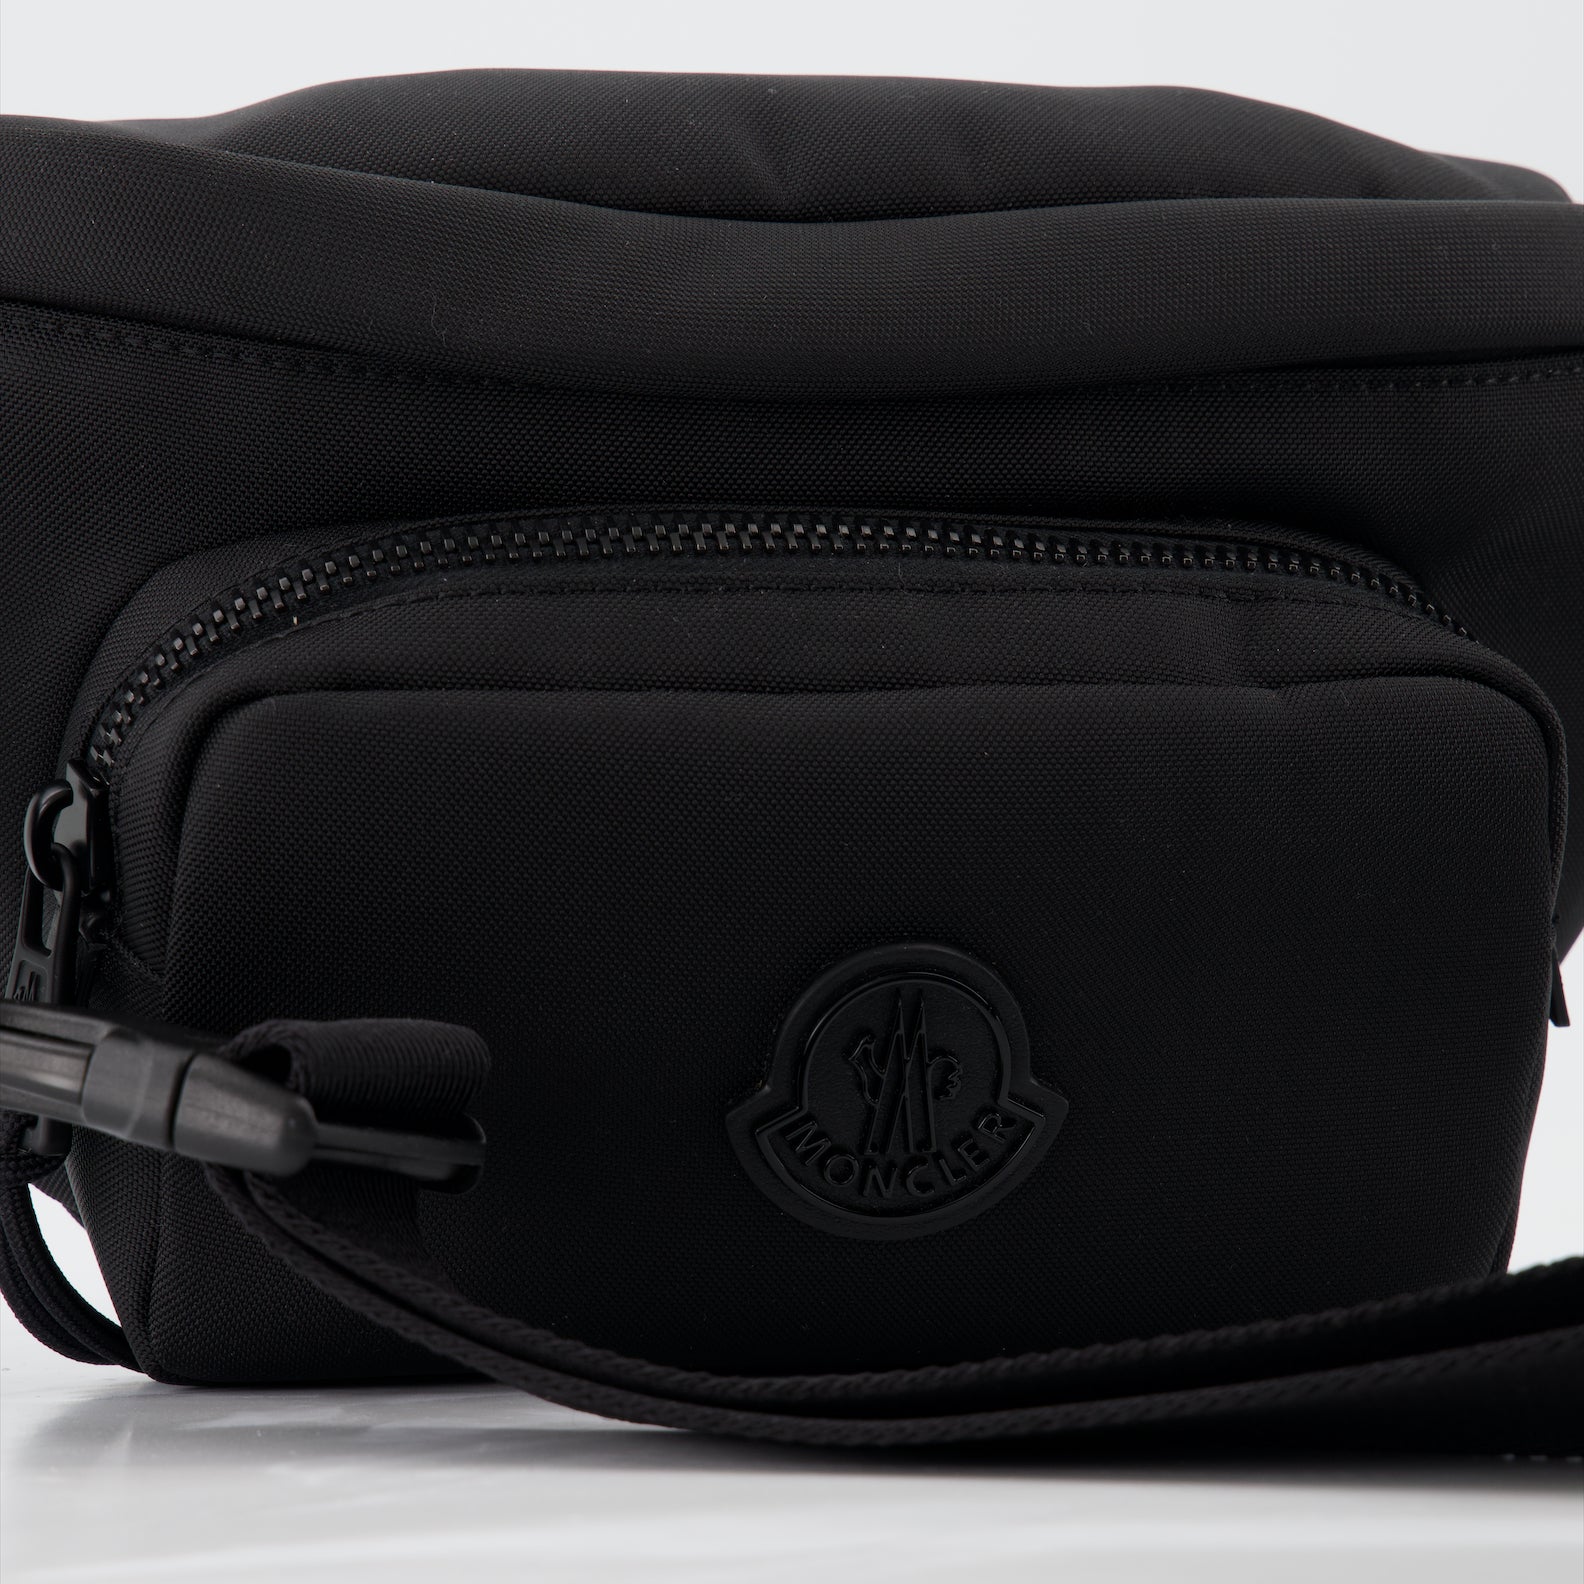 Durance fanny pack